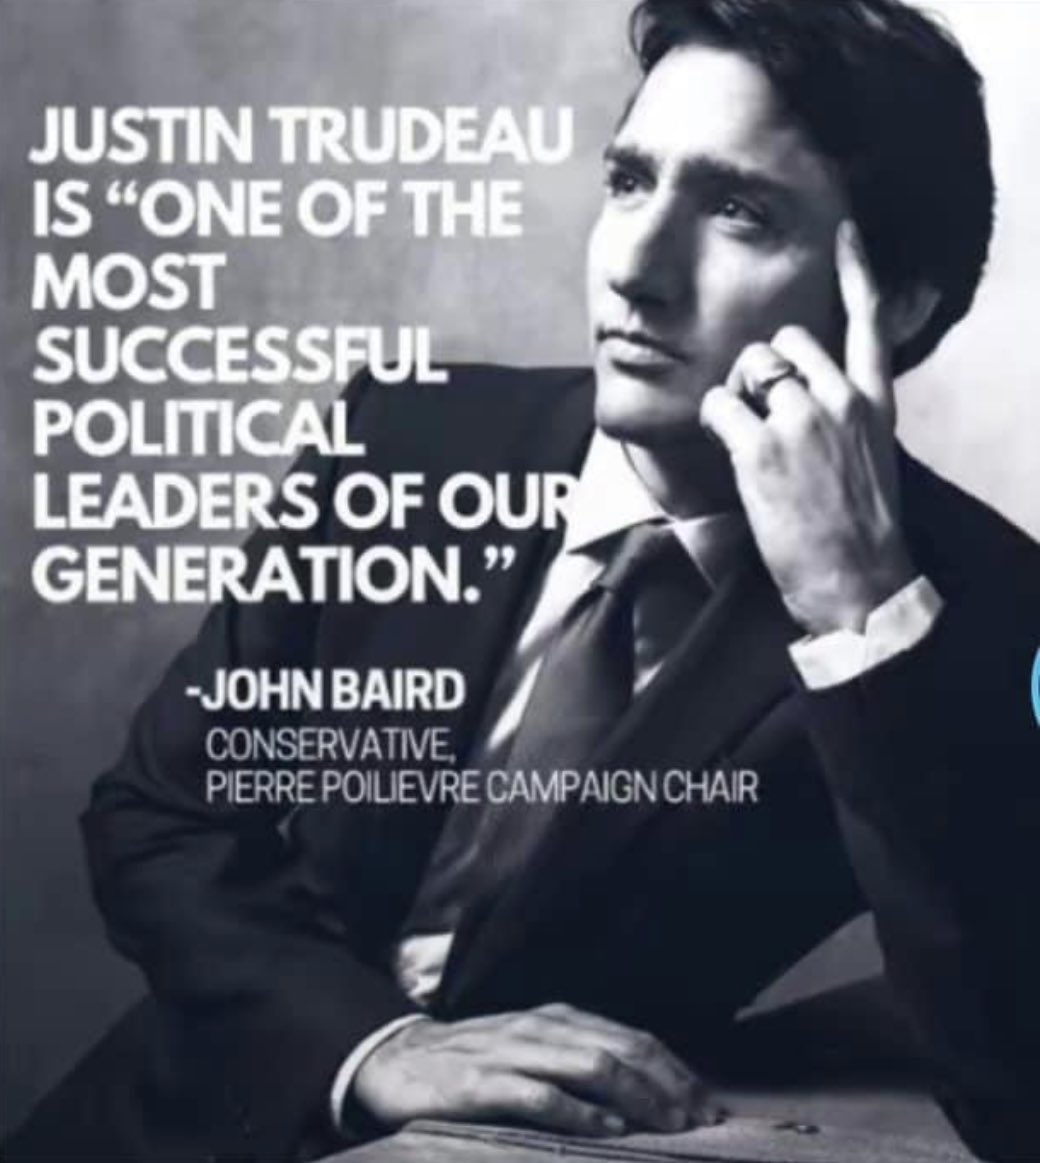 @BrandenCPC Justin Trudeau will go down in history as one of the best Prime Ministers Canada ever had. Stephen Harper the worst, and Pierre Poilievre will never be Prime Minister. NEVER!